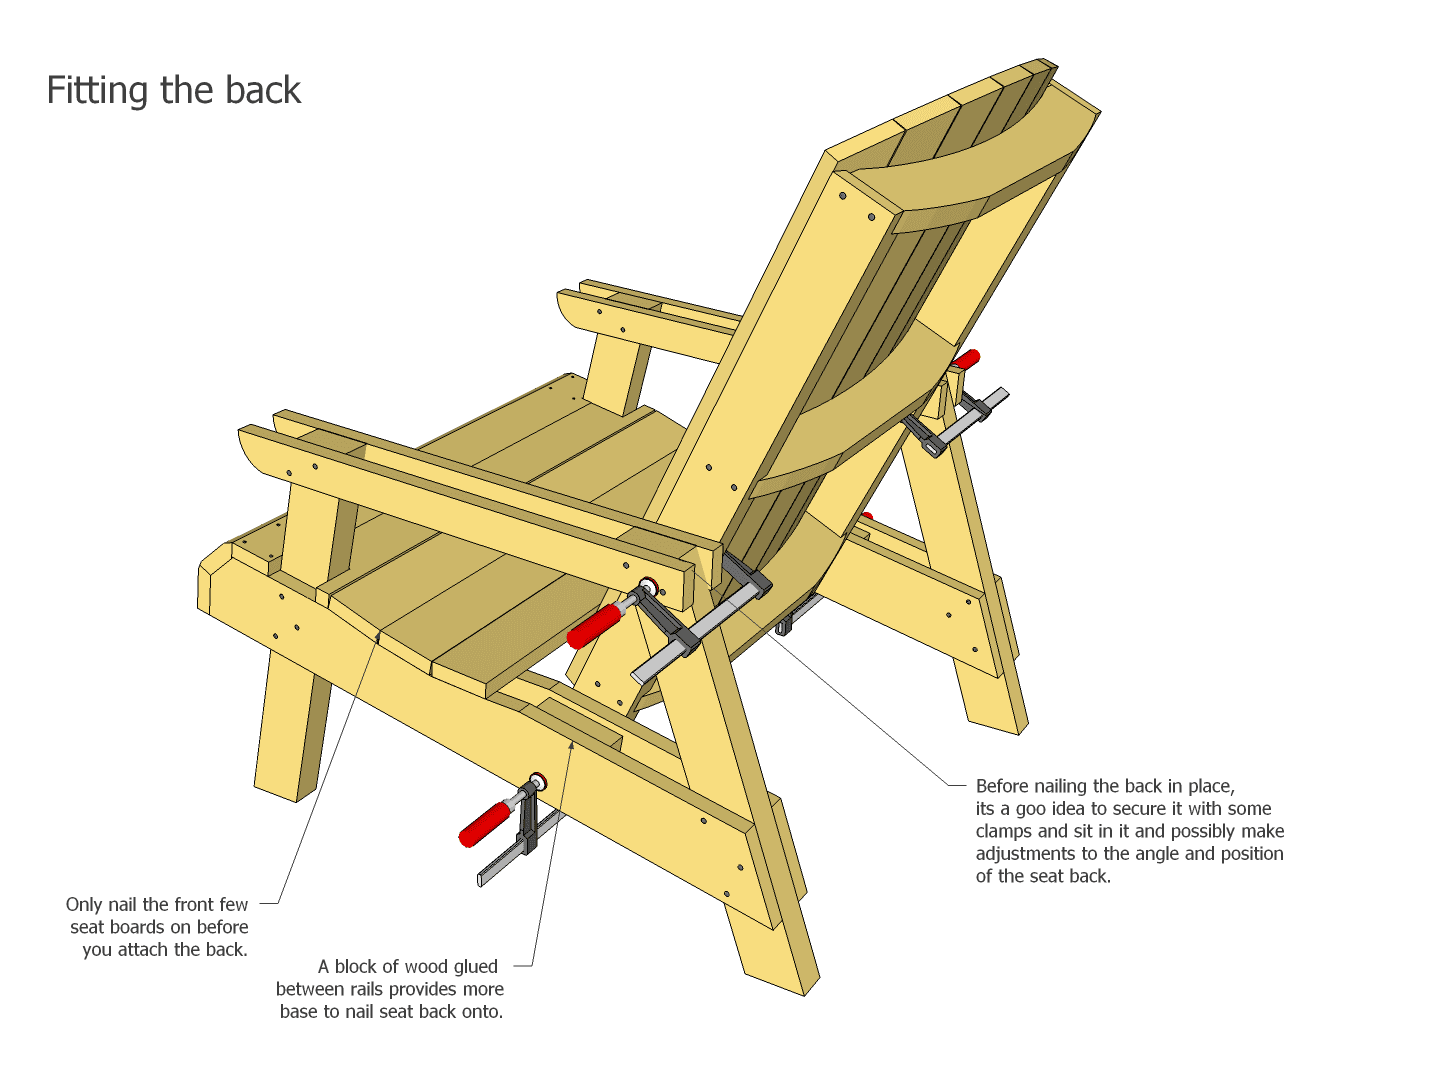 ... lawn chair .You will need the free Google SketchUp to open the